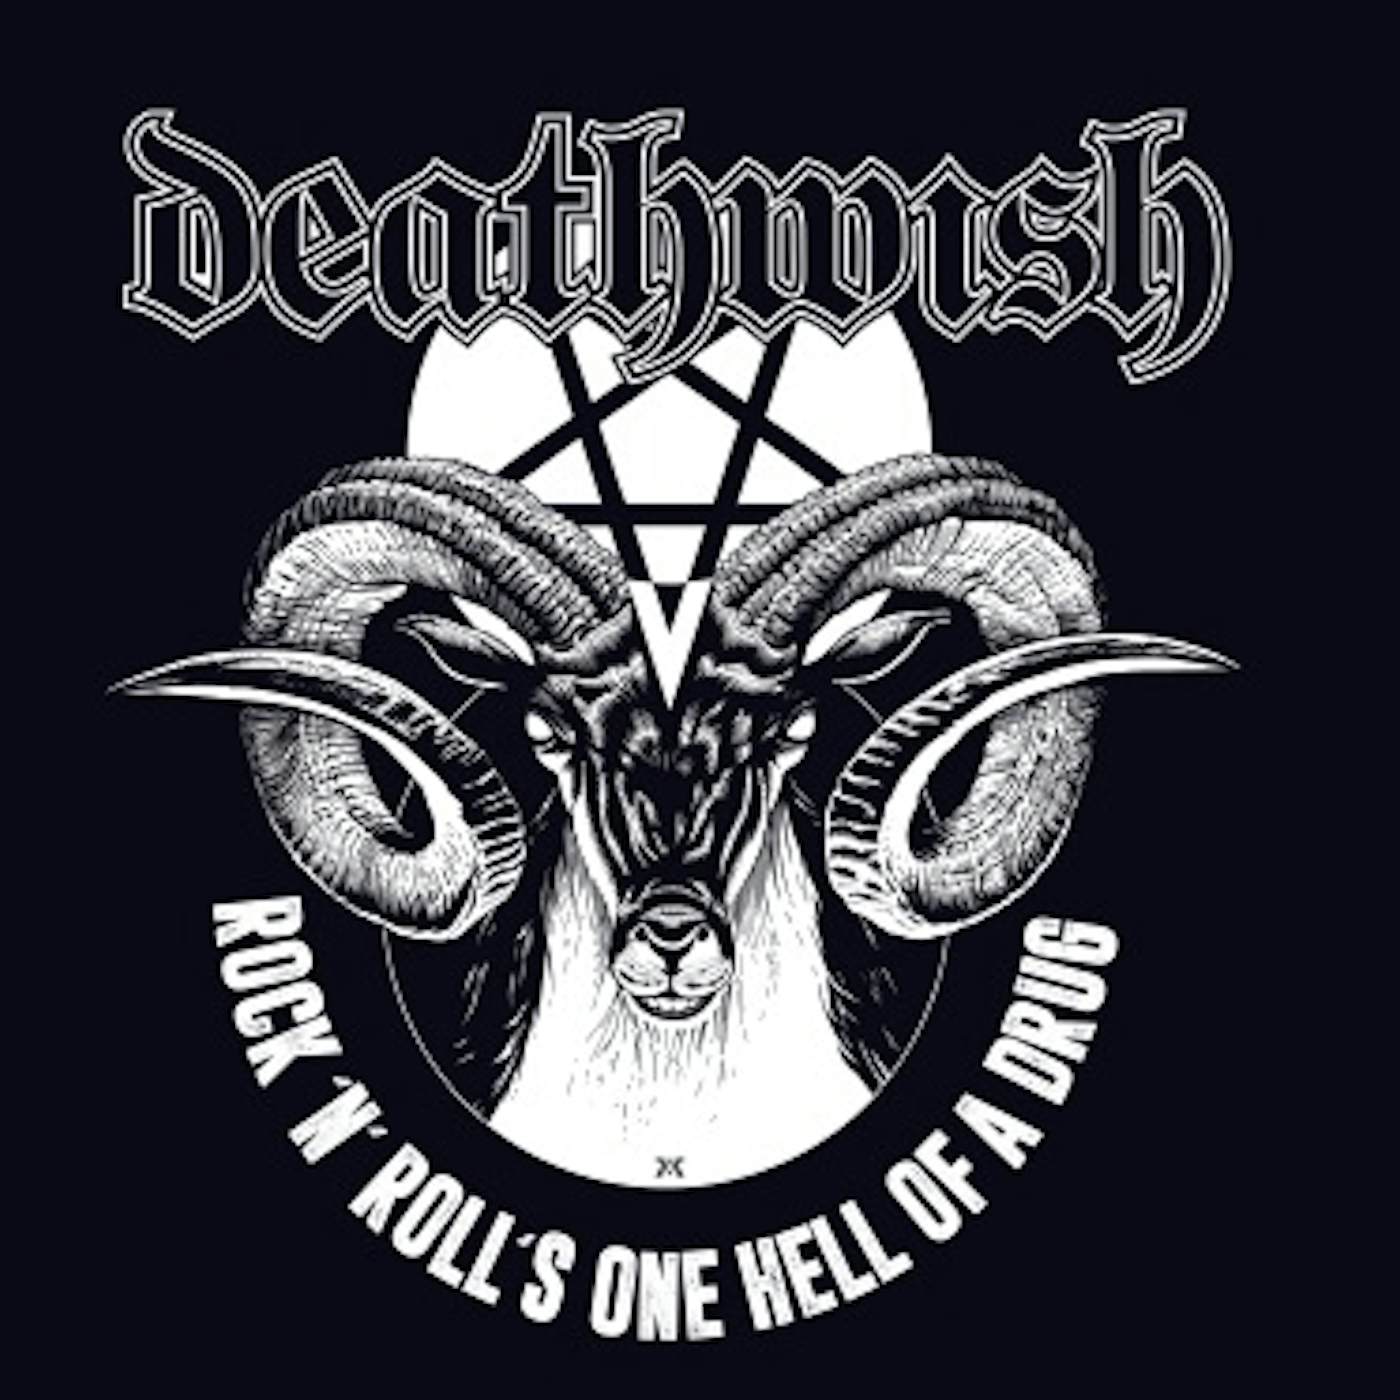 Deathwish ROCK N ROLLS ONE HELL OF A DRUG Vinyl Record